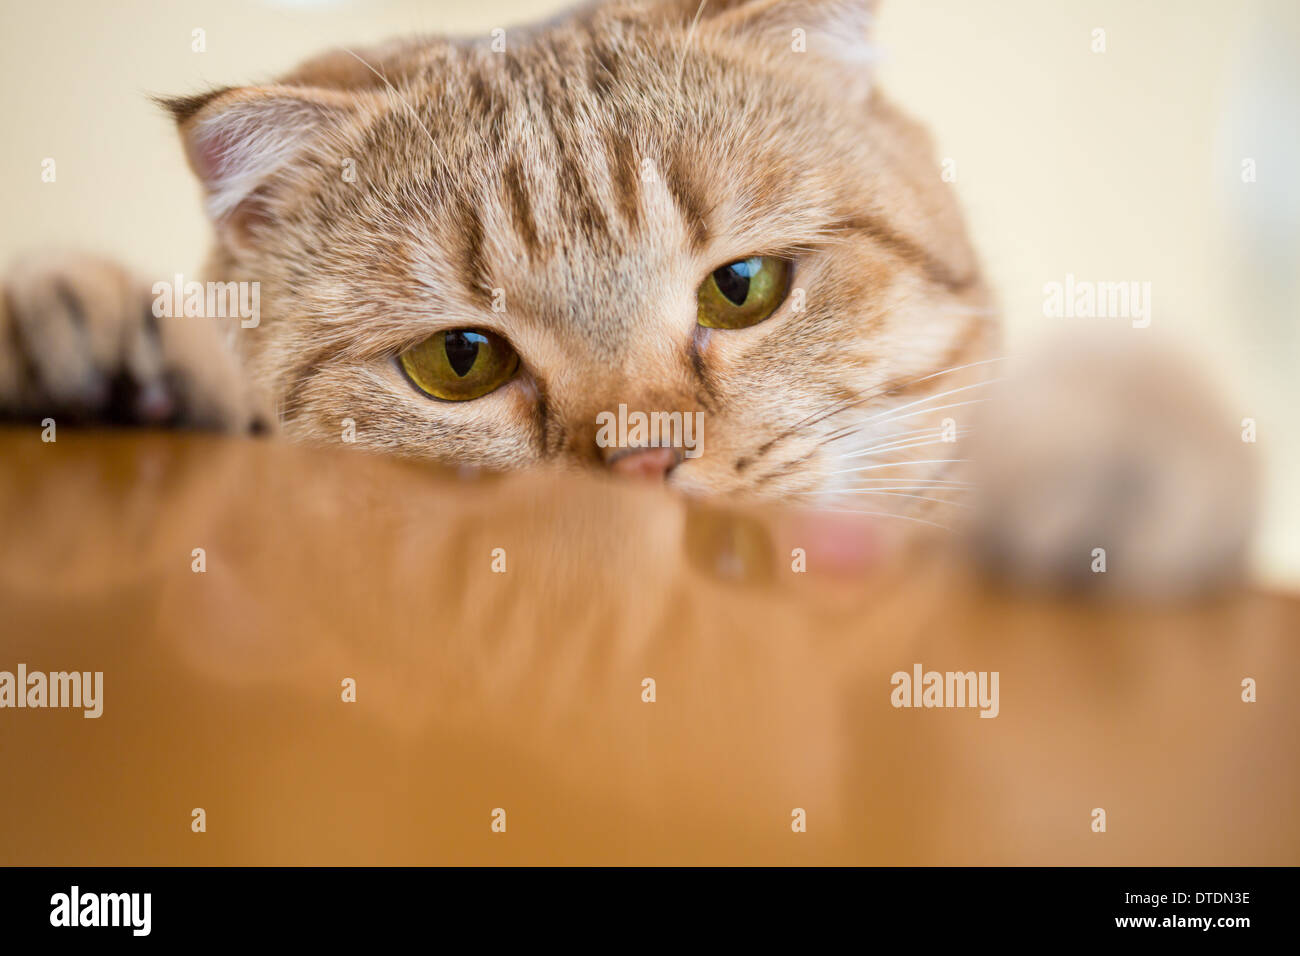 Cat trying to steal something from kitchen table Stock Photo